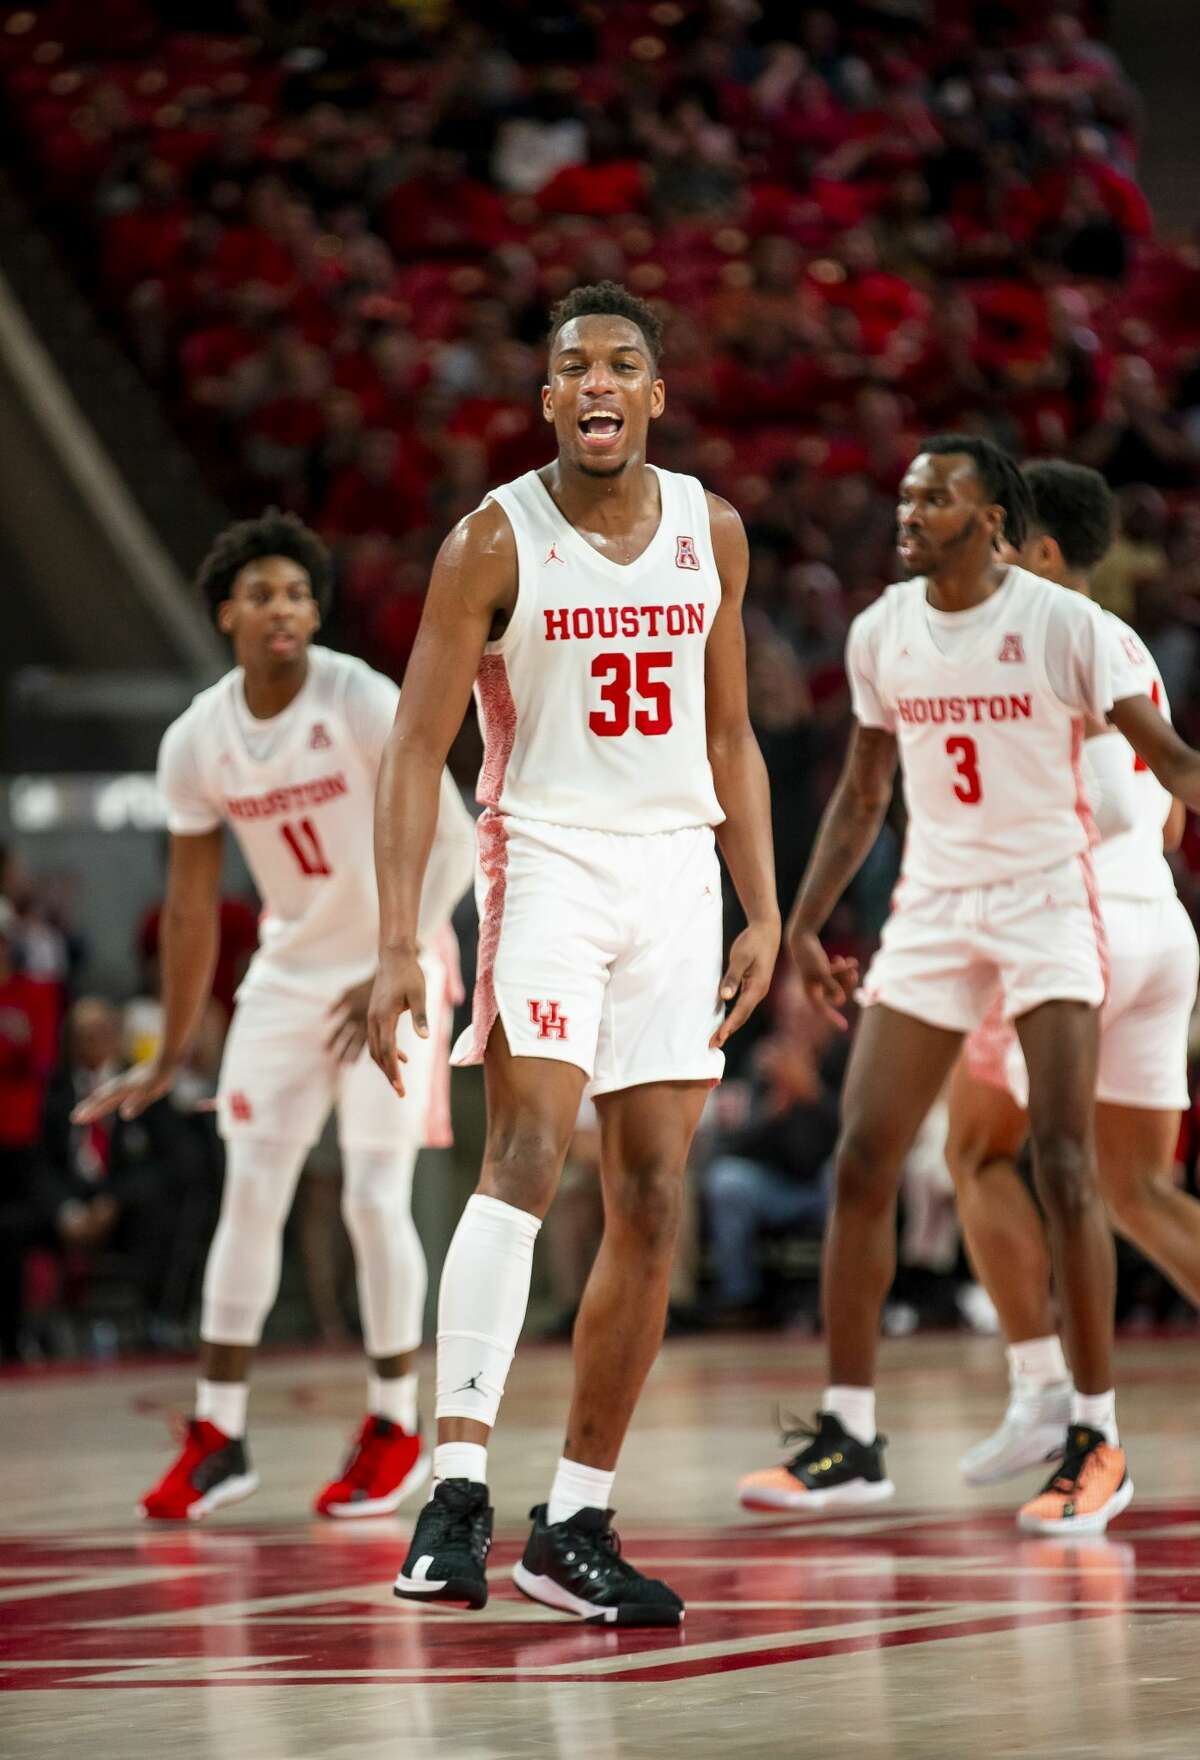 Houston Cougars forward Fabian White Jr. (35) reacts after a play during the first half of the Cougars' game against the Mustangs at the Fertitta Center in Houston, Wednesday, Jan. 15, 2020.